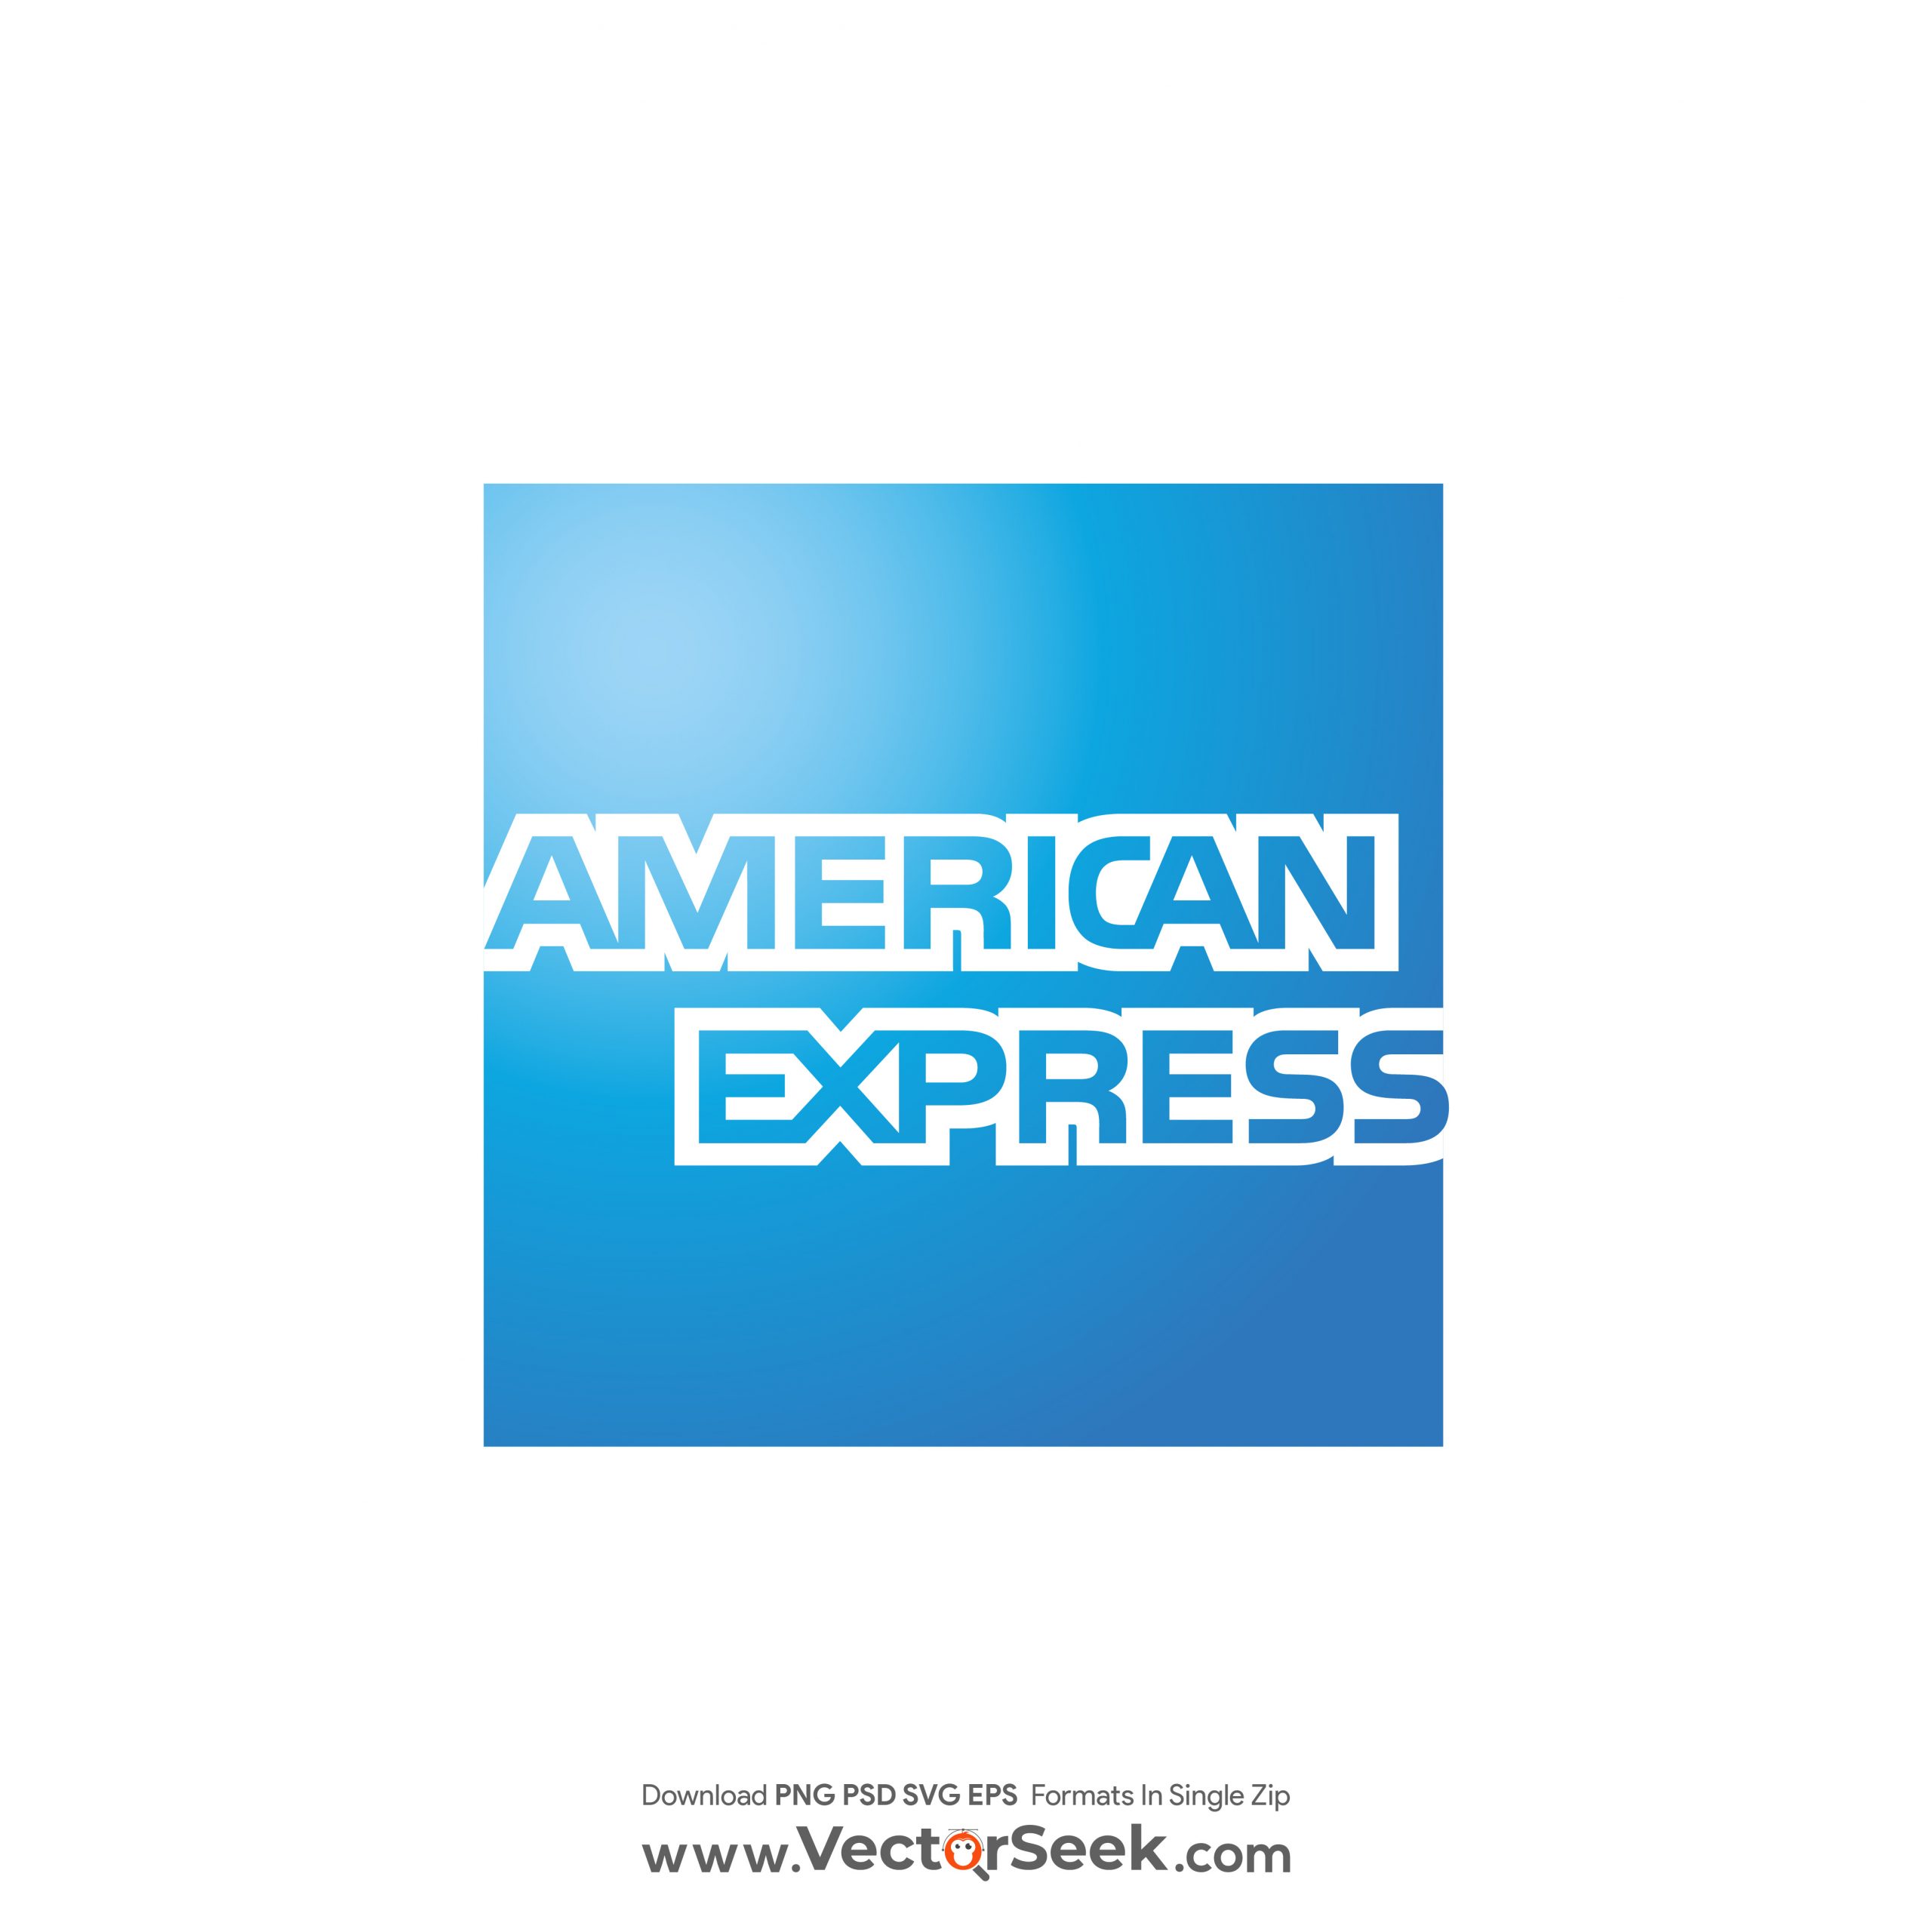 Compare Cards & Apply Online | American Express Indonesia